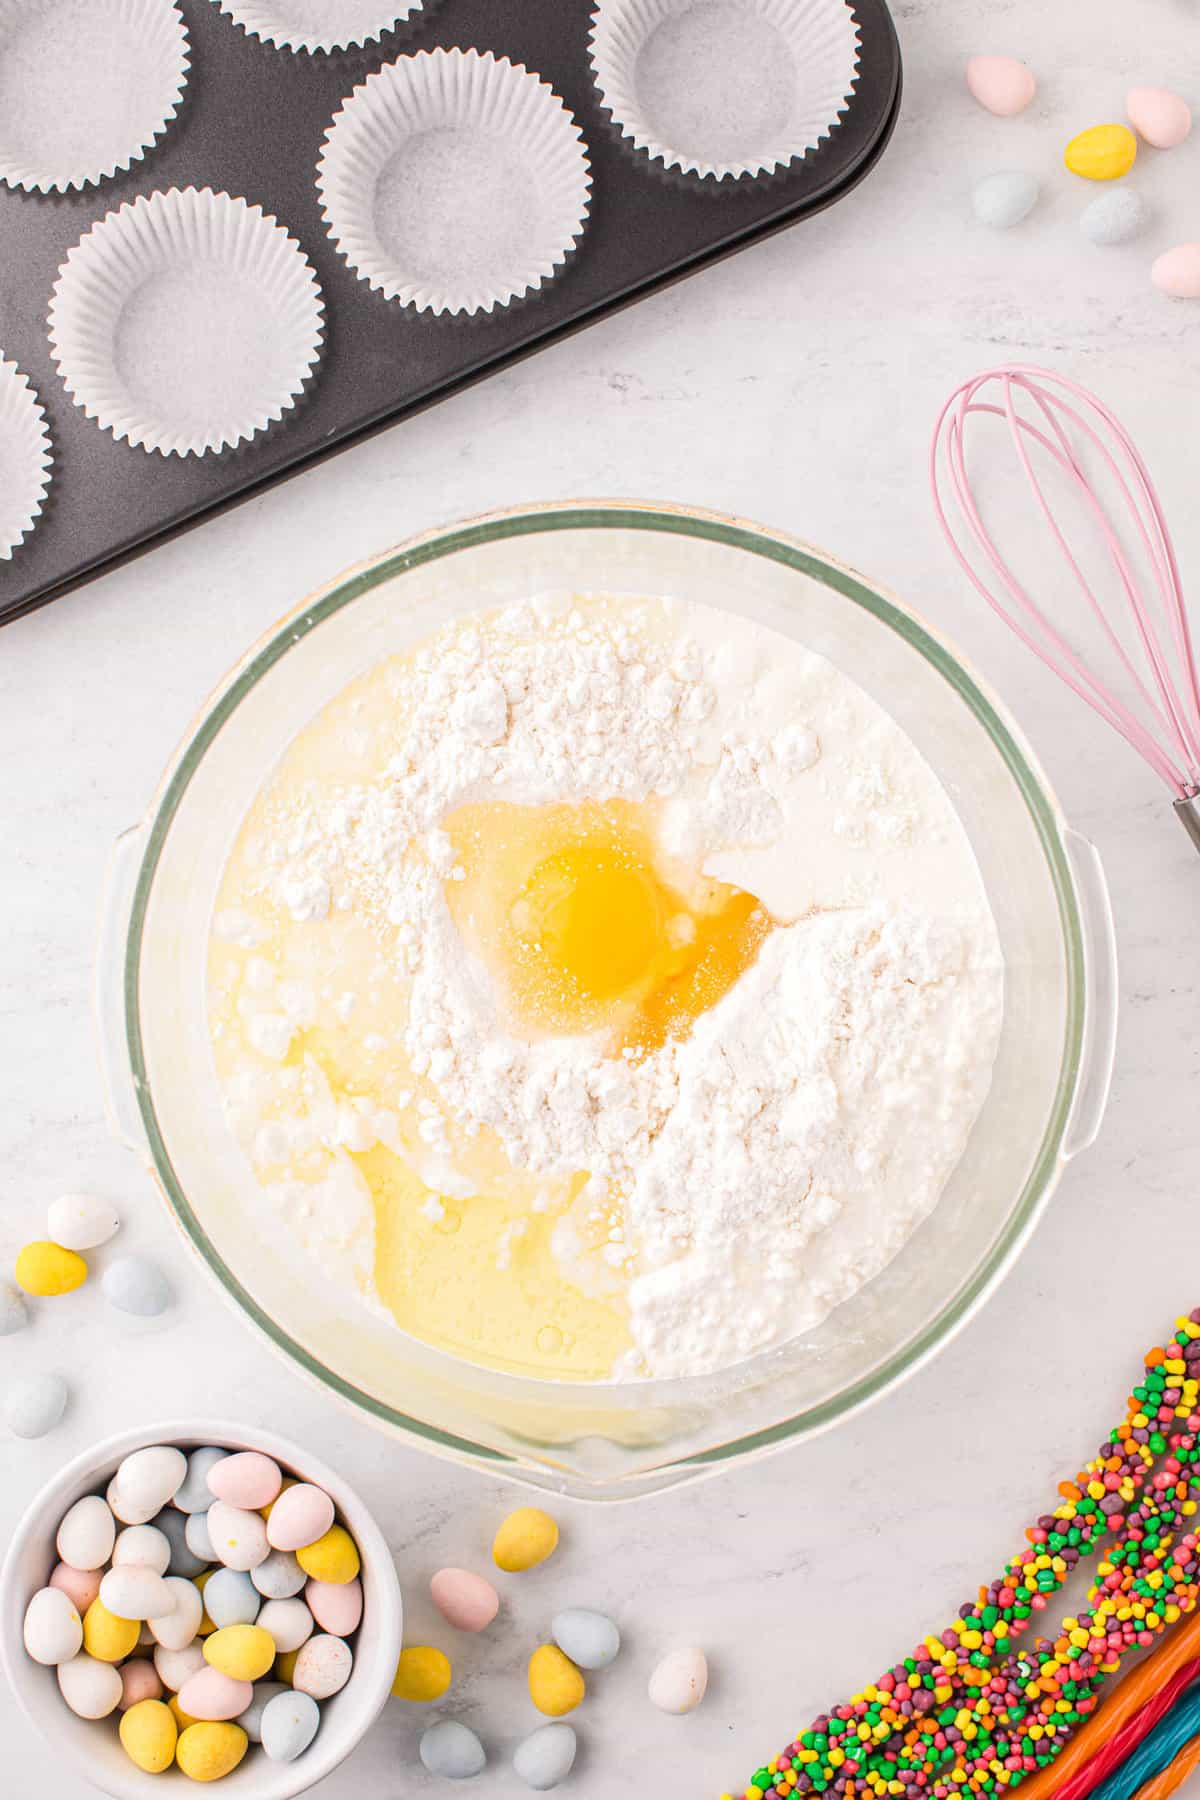 Mix together cake mix, eggs, half and half and vegetable oil until smooth.